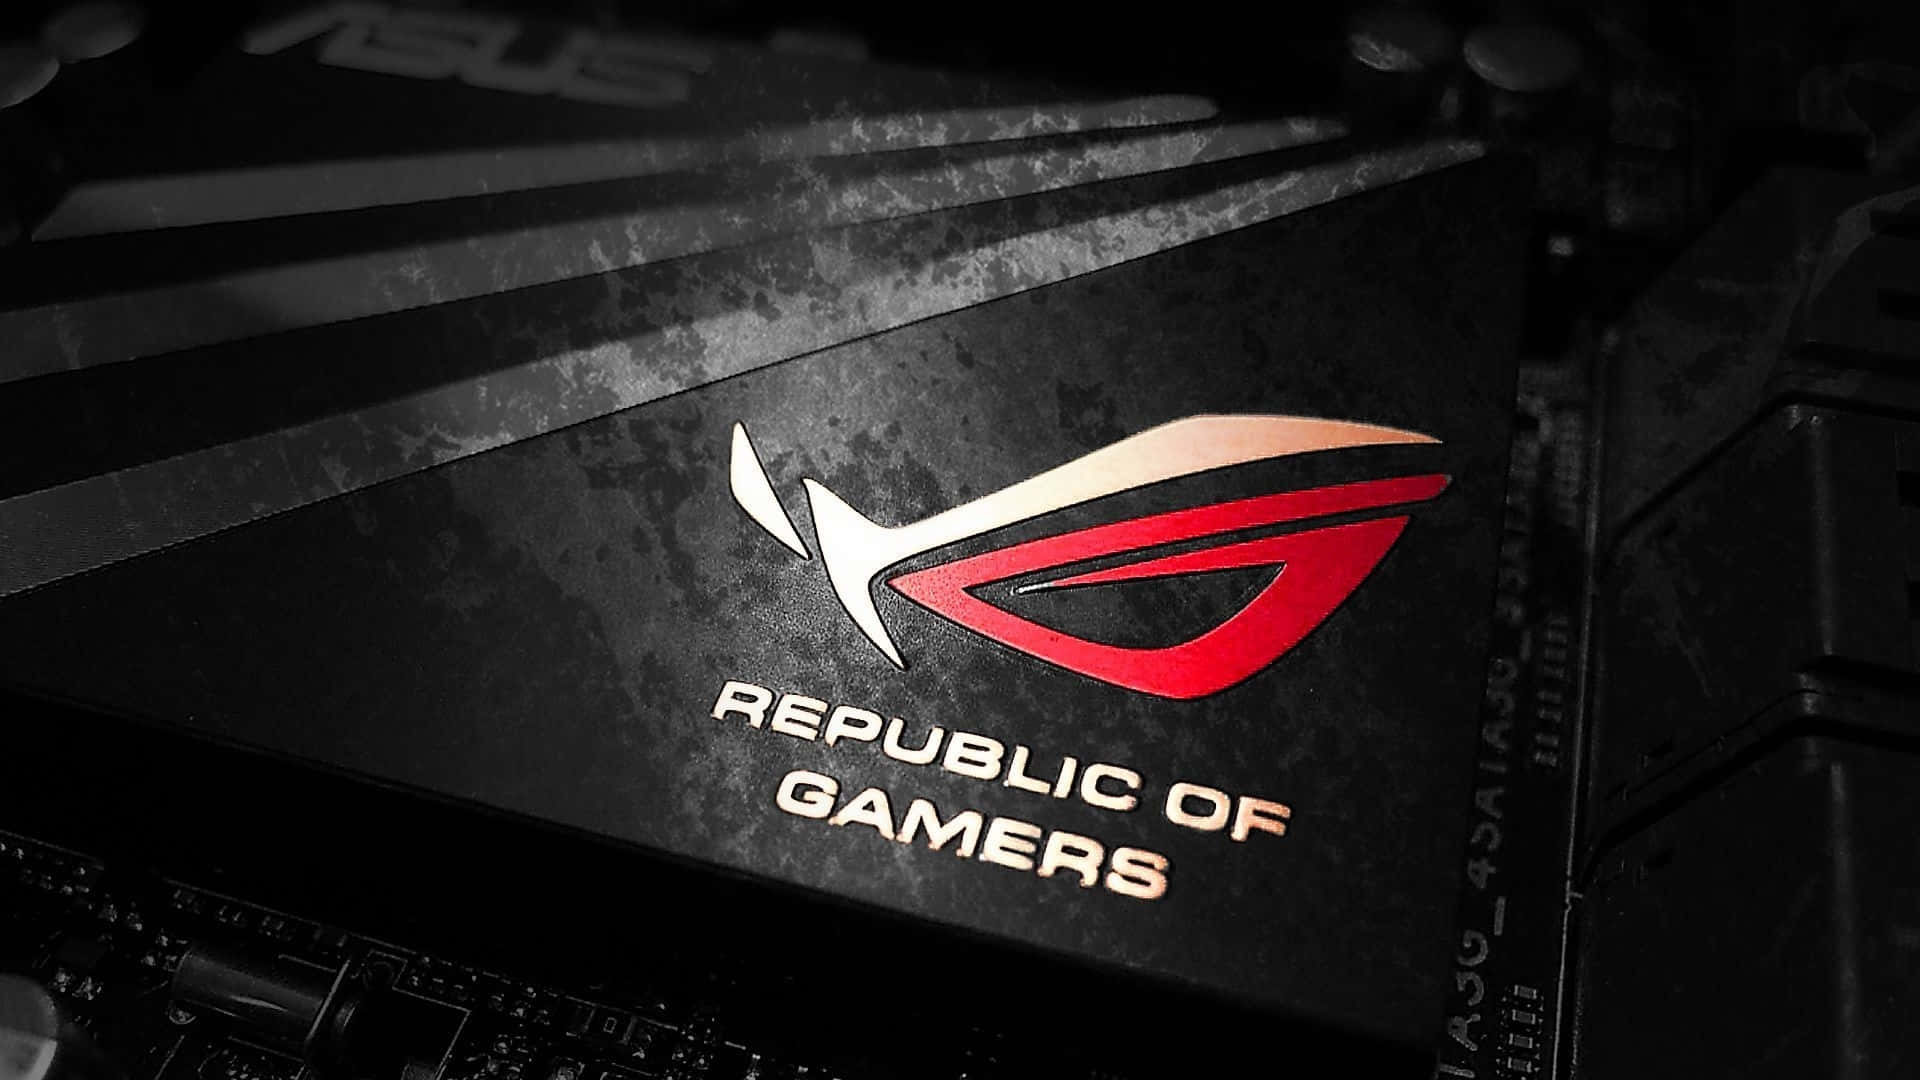 Take your gaming experience to another level with Rog